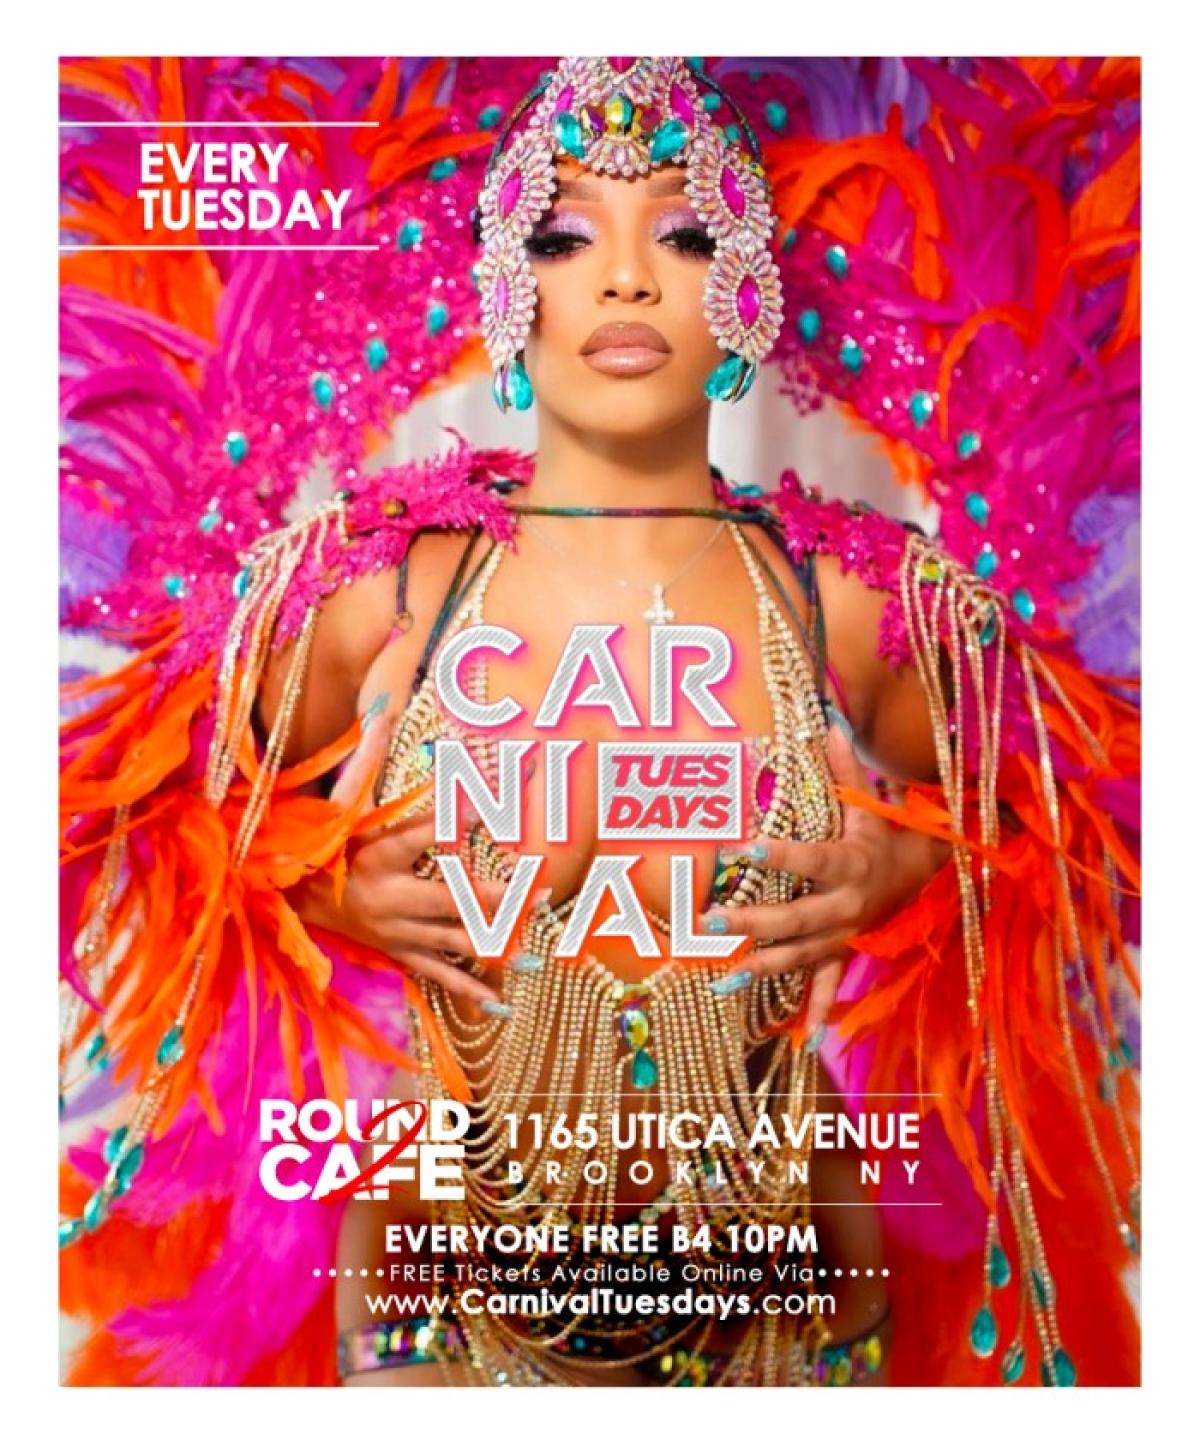 Carnival Tuesdays flyer or graphic.